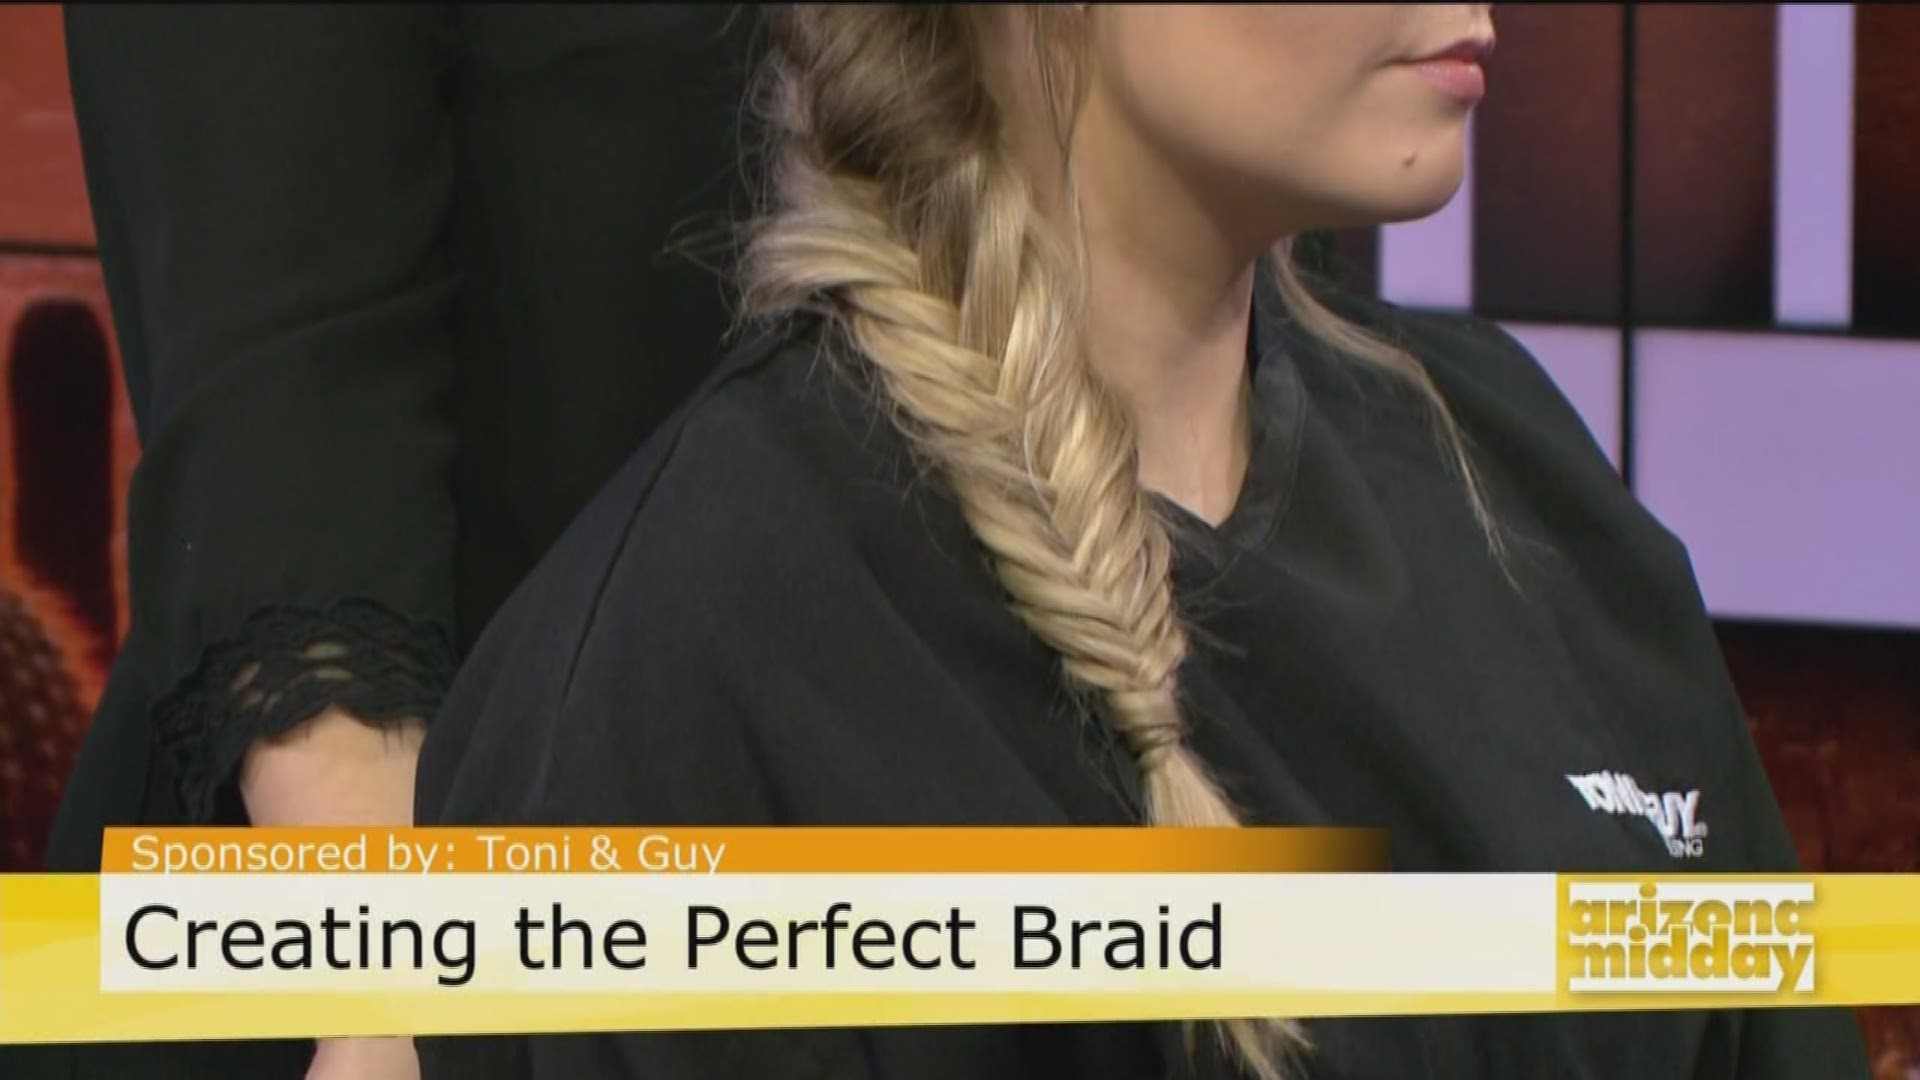 Toni & Guy shows you how to spruce up your haitstyle with a fishtail braid and how to turn it into an up-do!